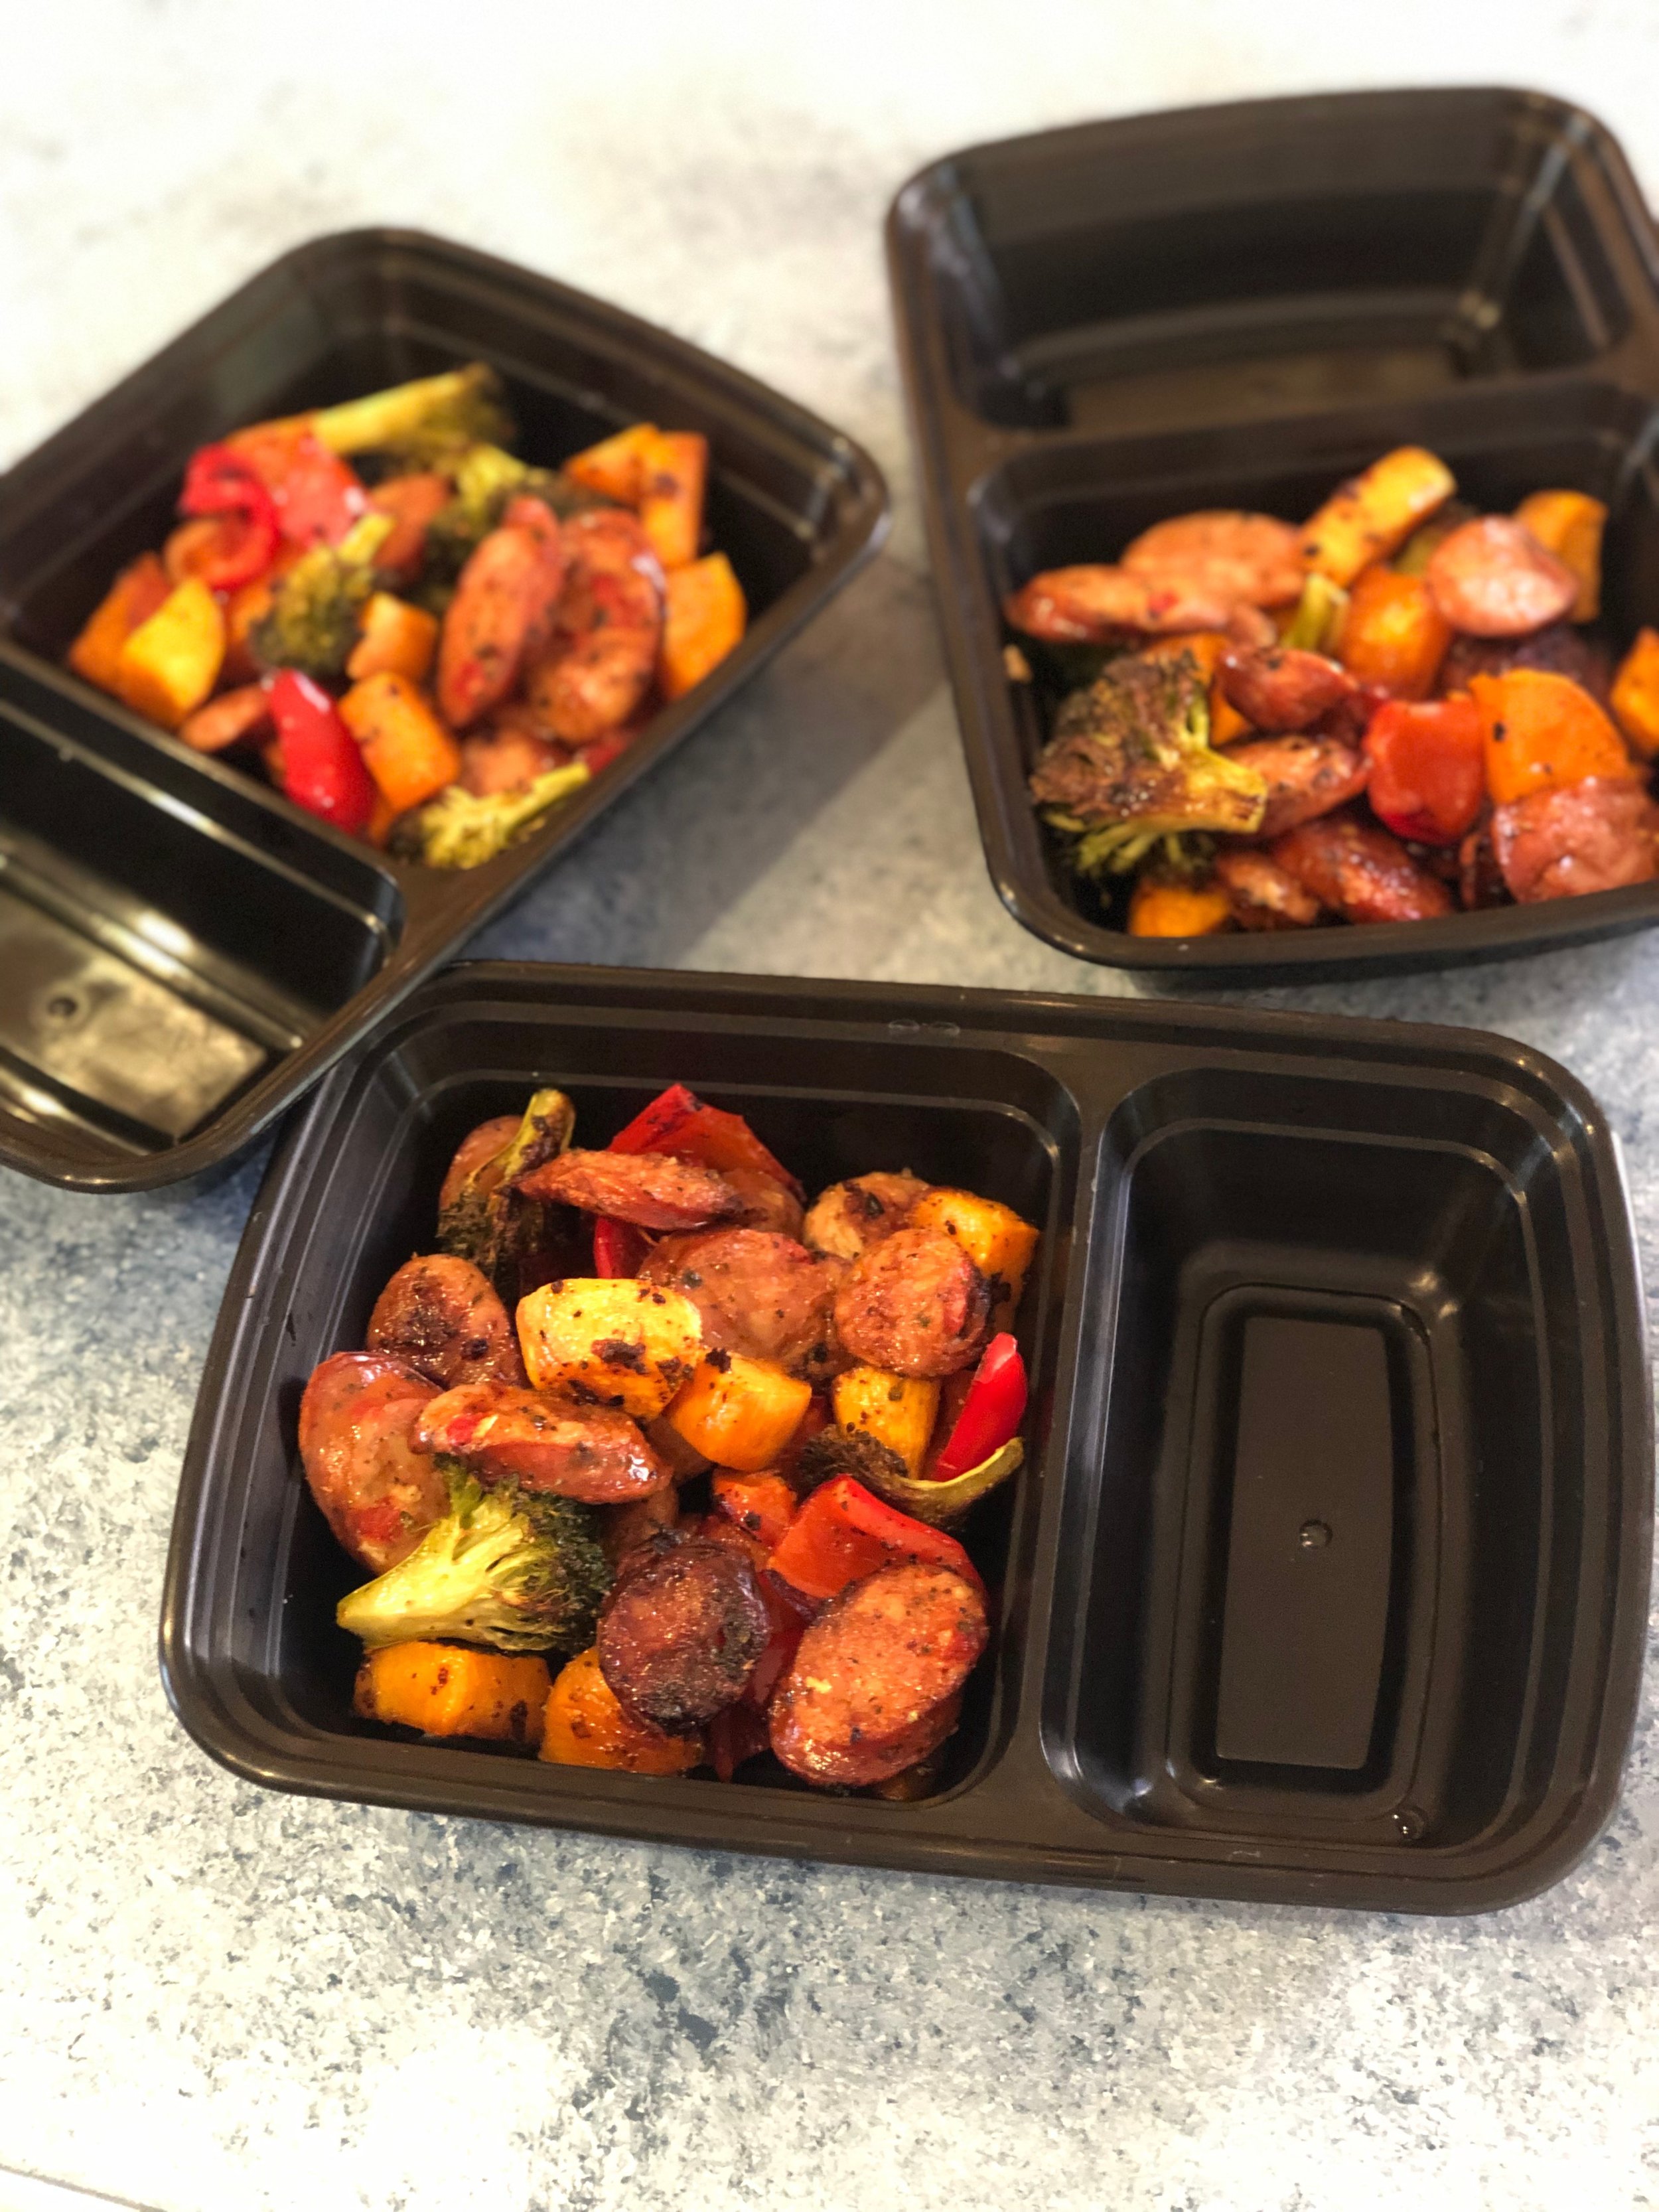 Meal Prep: Roasted Chicken Sausage and Vegetables — Total April